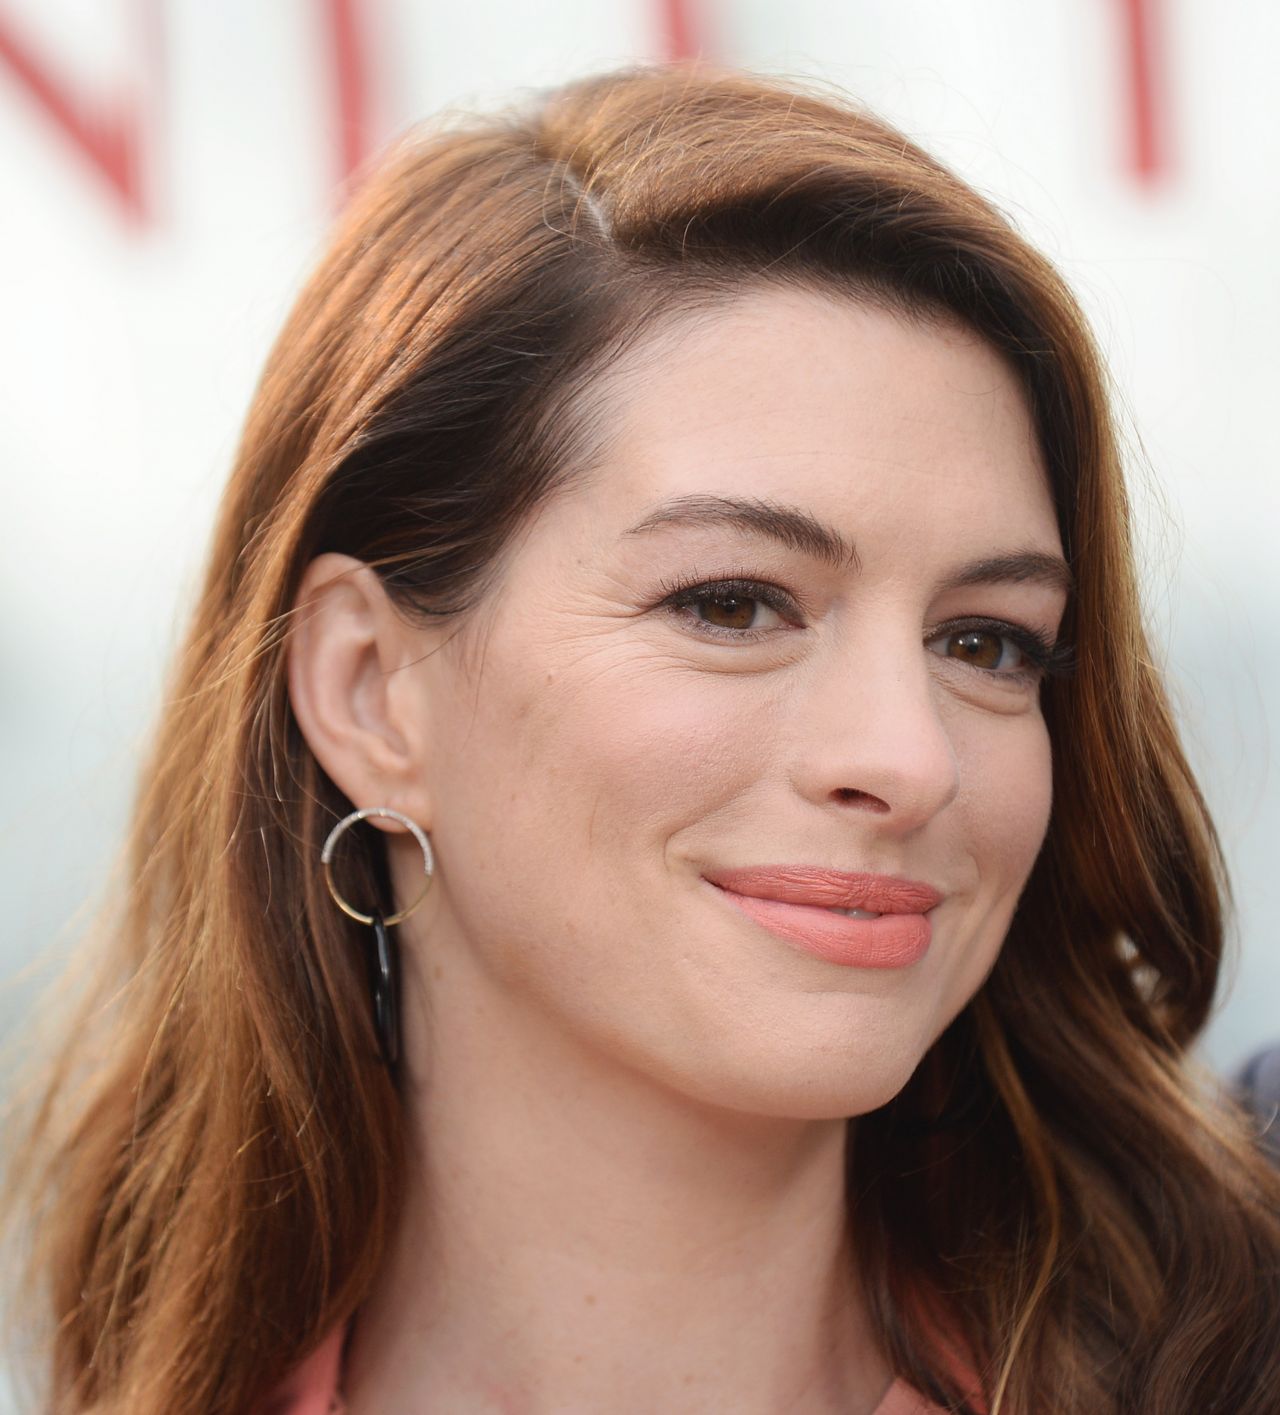 Anne Hathaway - "Serenity" Photo Call in Marina del Rey
